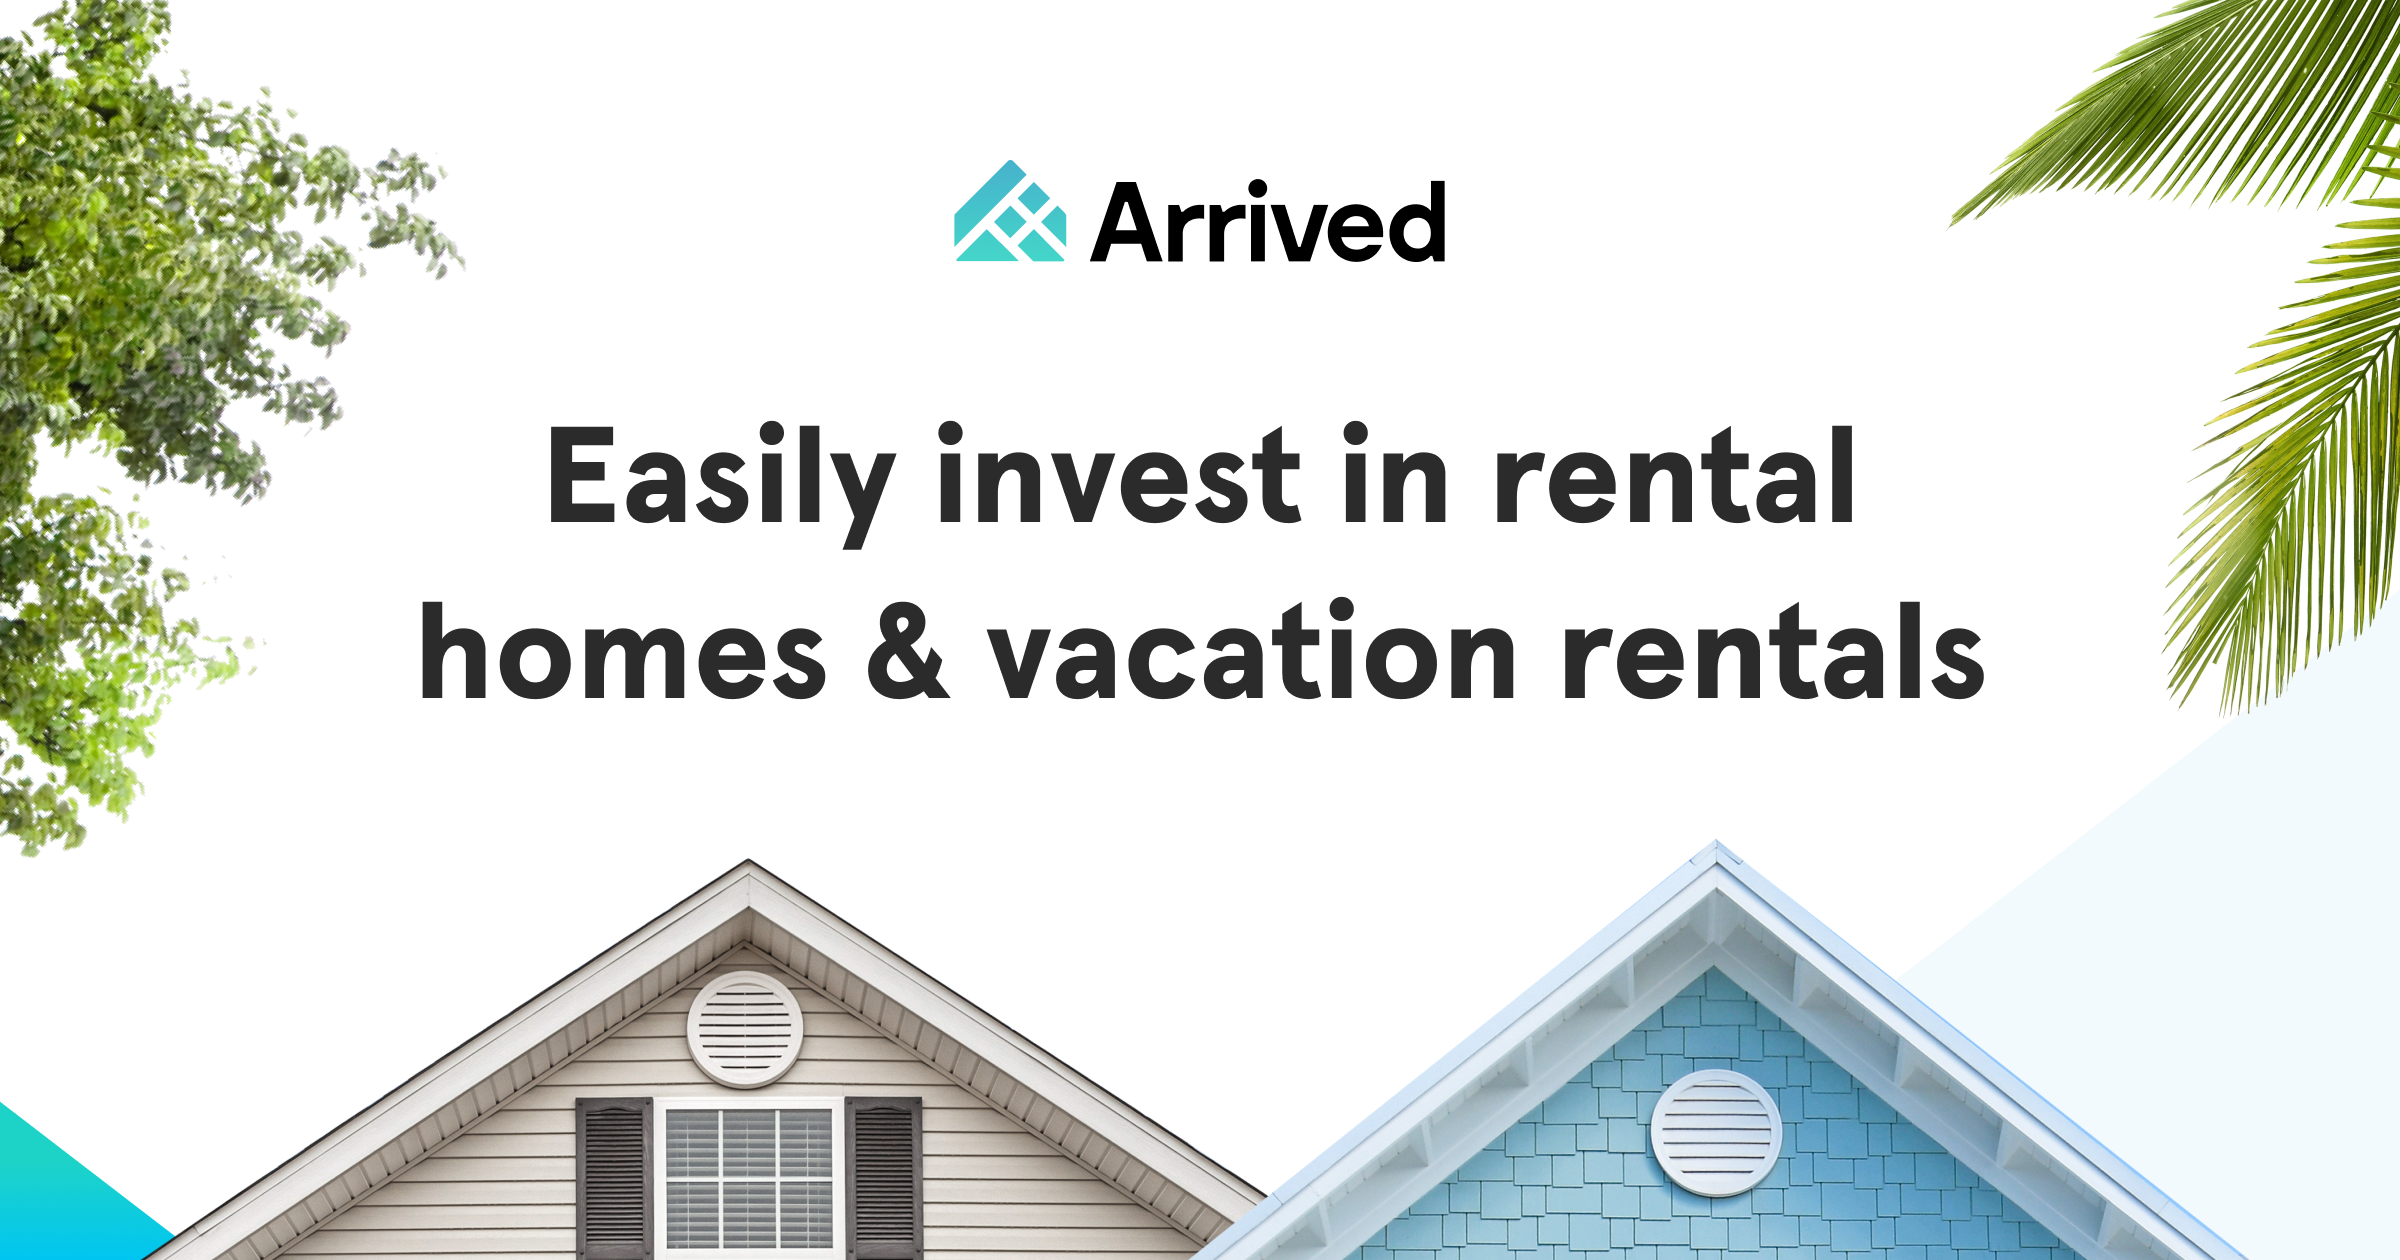 Expanding Horizons: Misfit Homes Featured on Arrived Homes' Investment Platform!